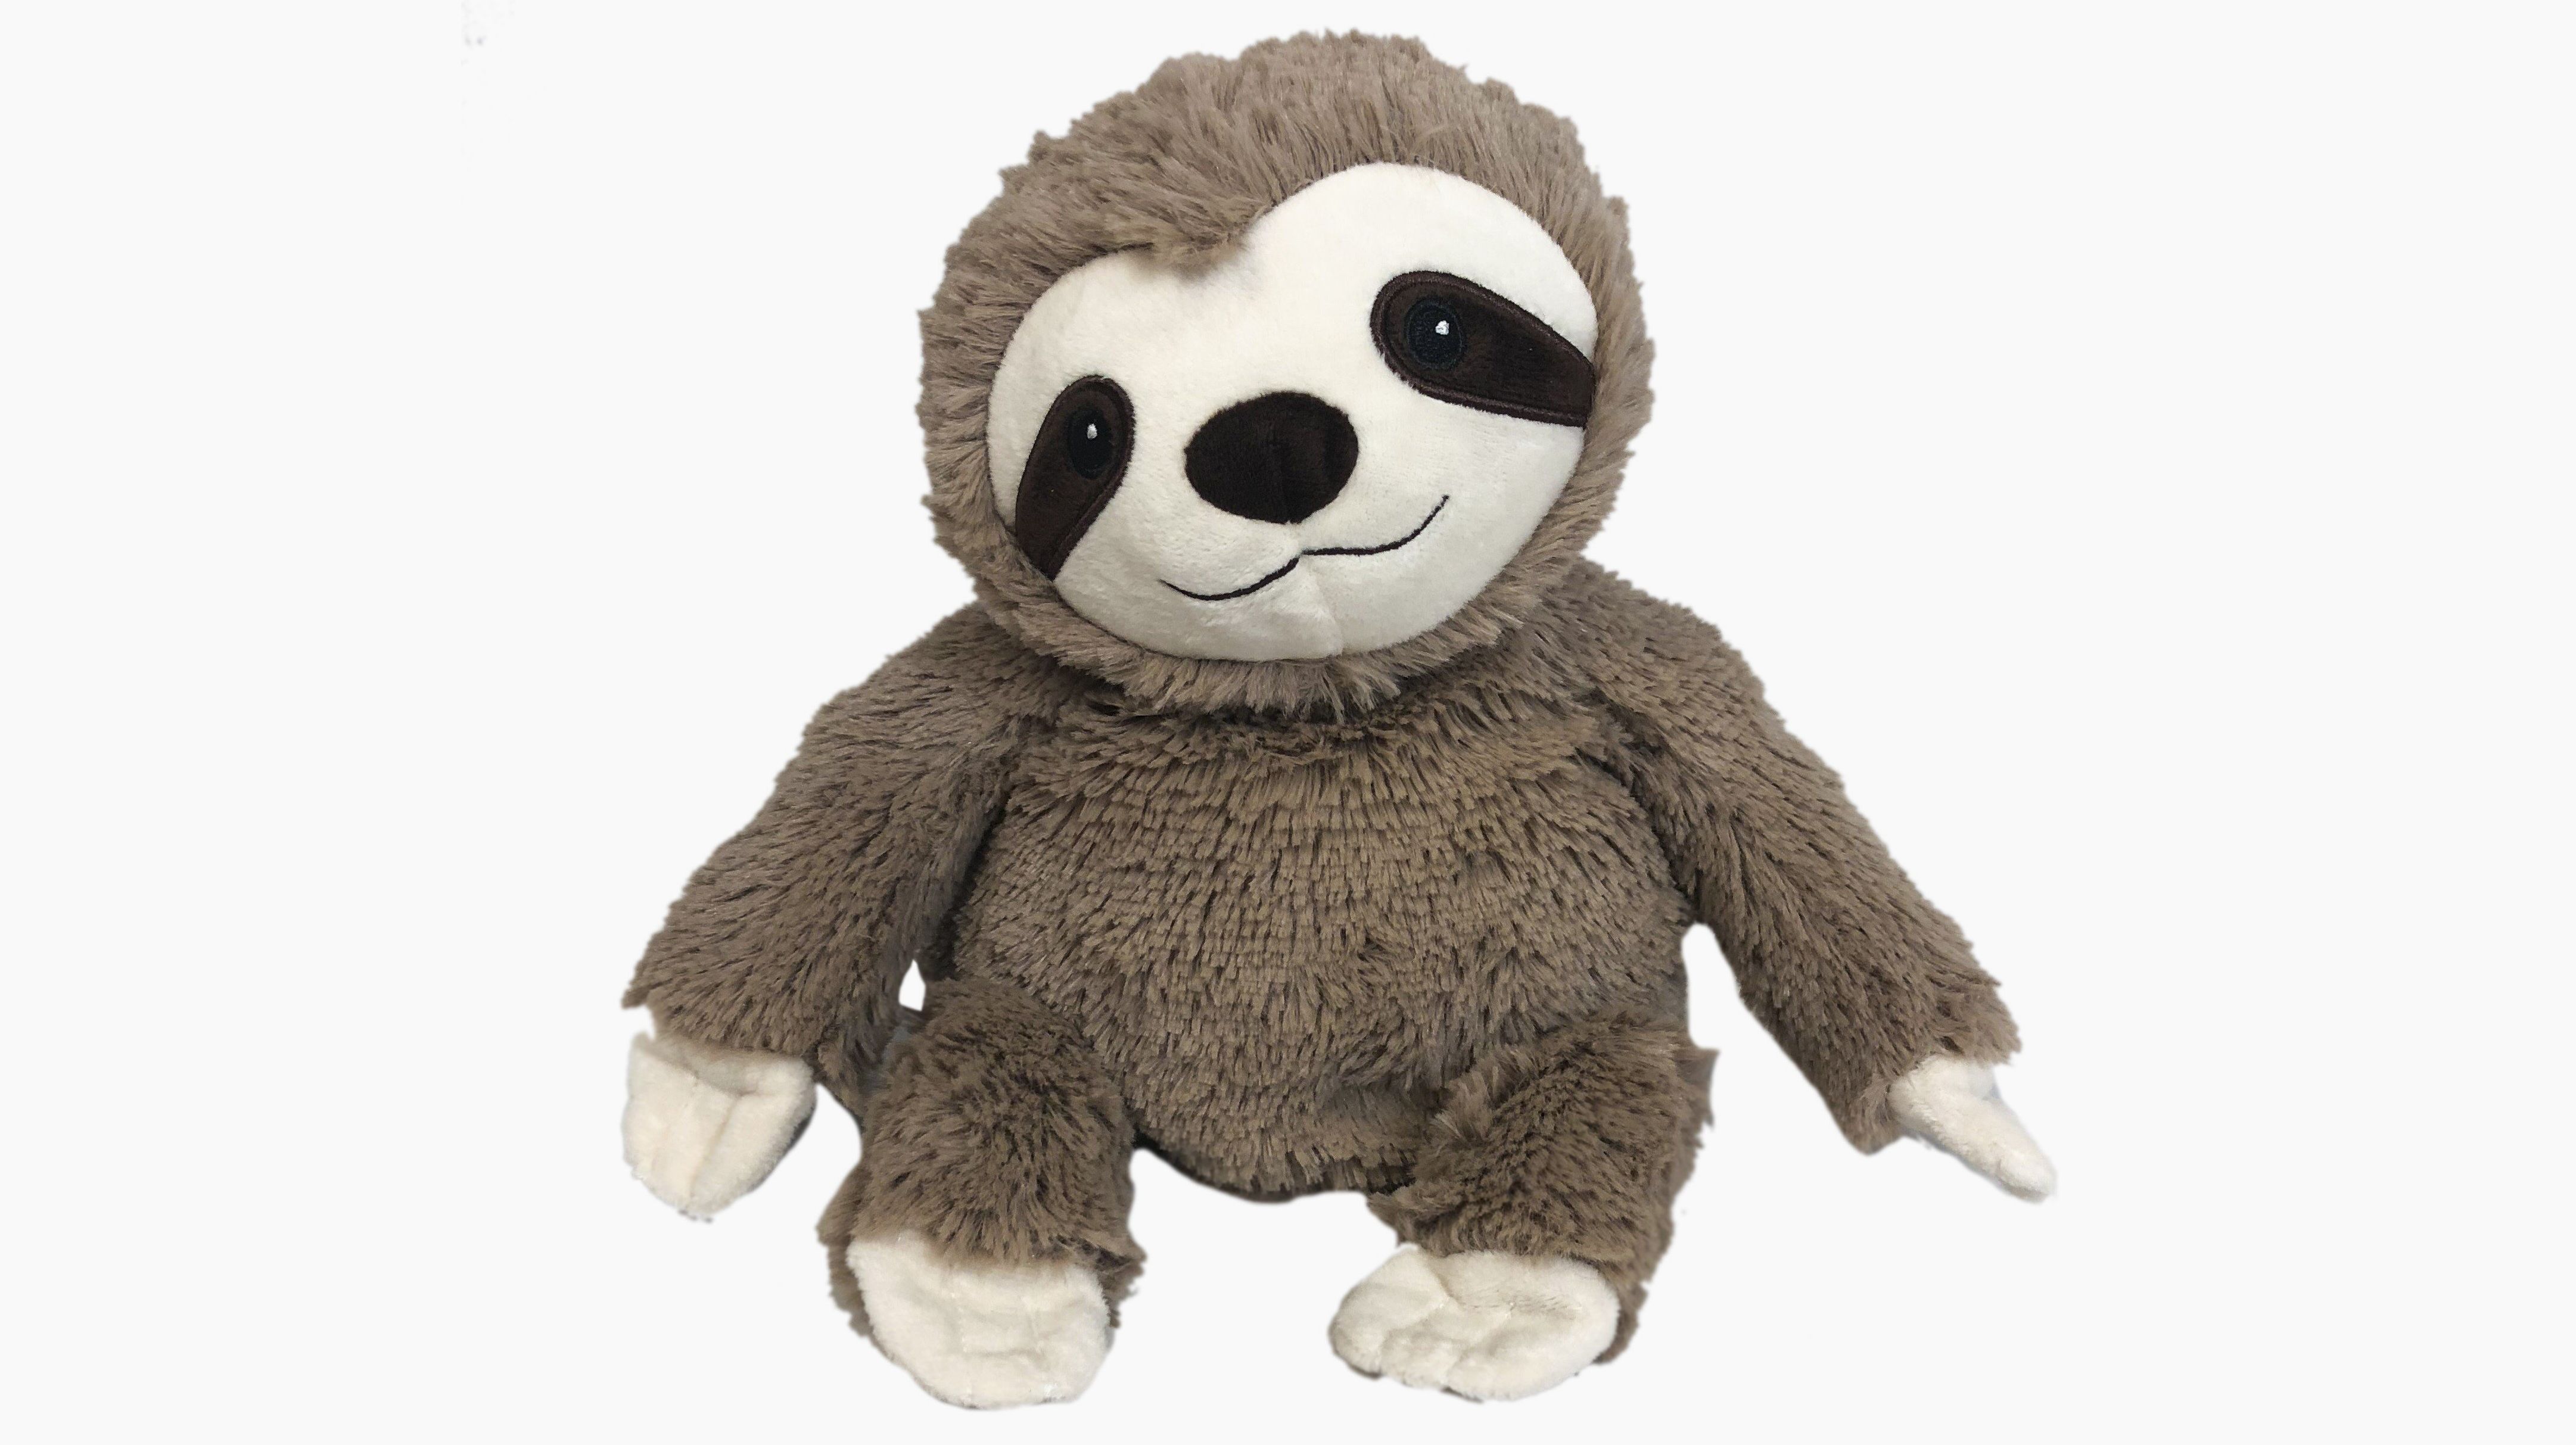 This Cuddly Microwaveable Sloth Soothes Stress Aches And Pains Mental Floss